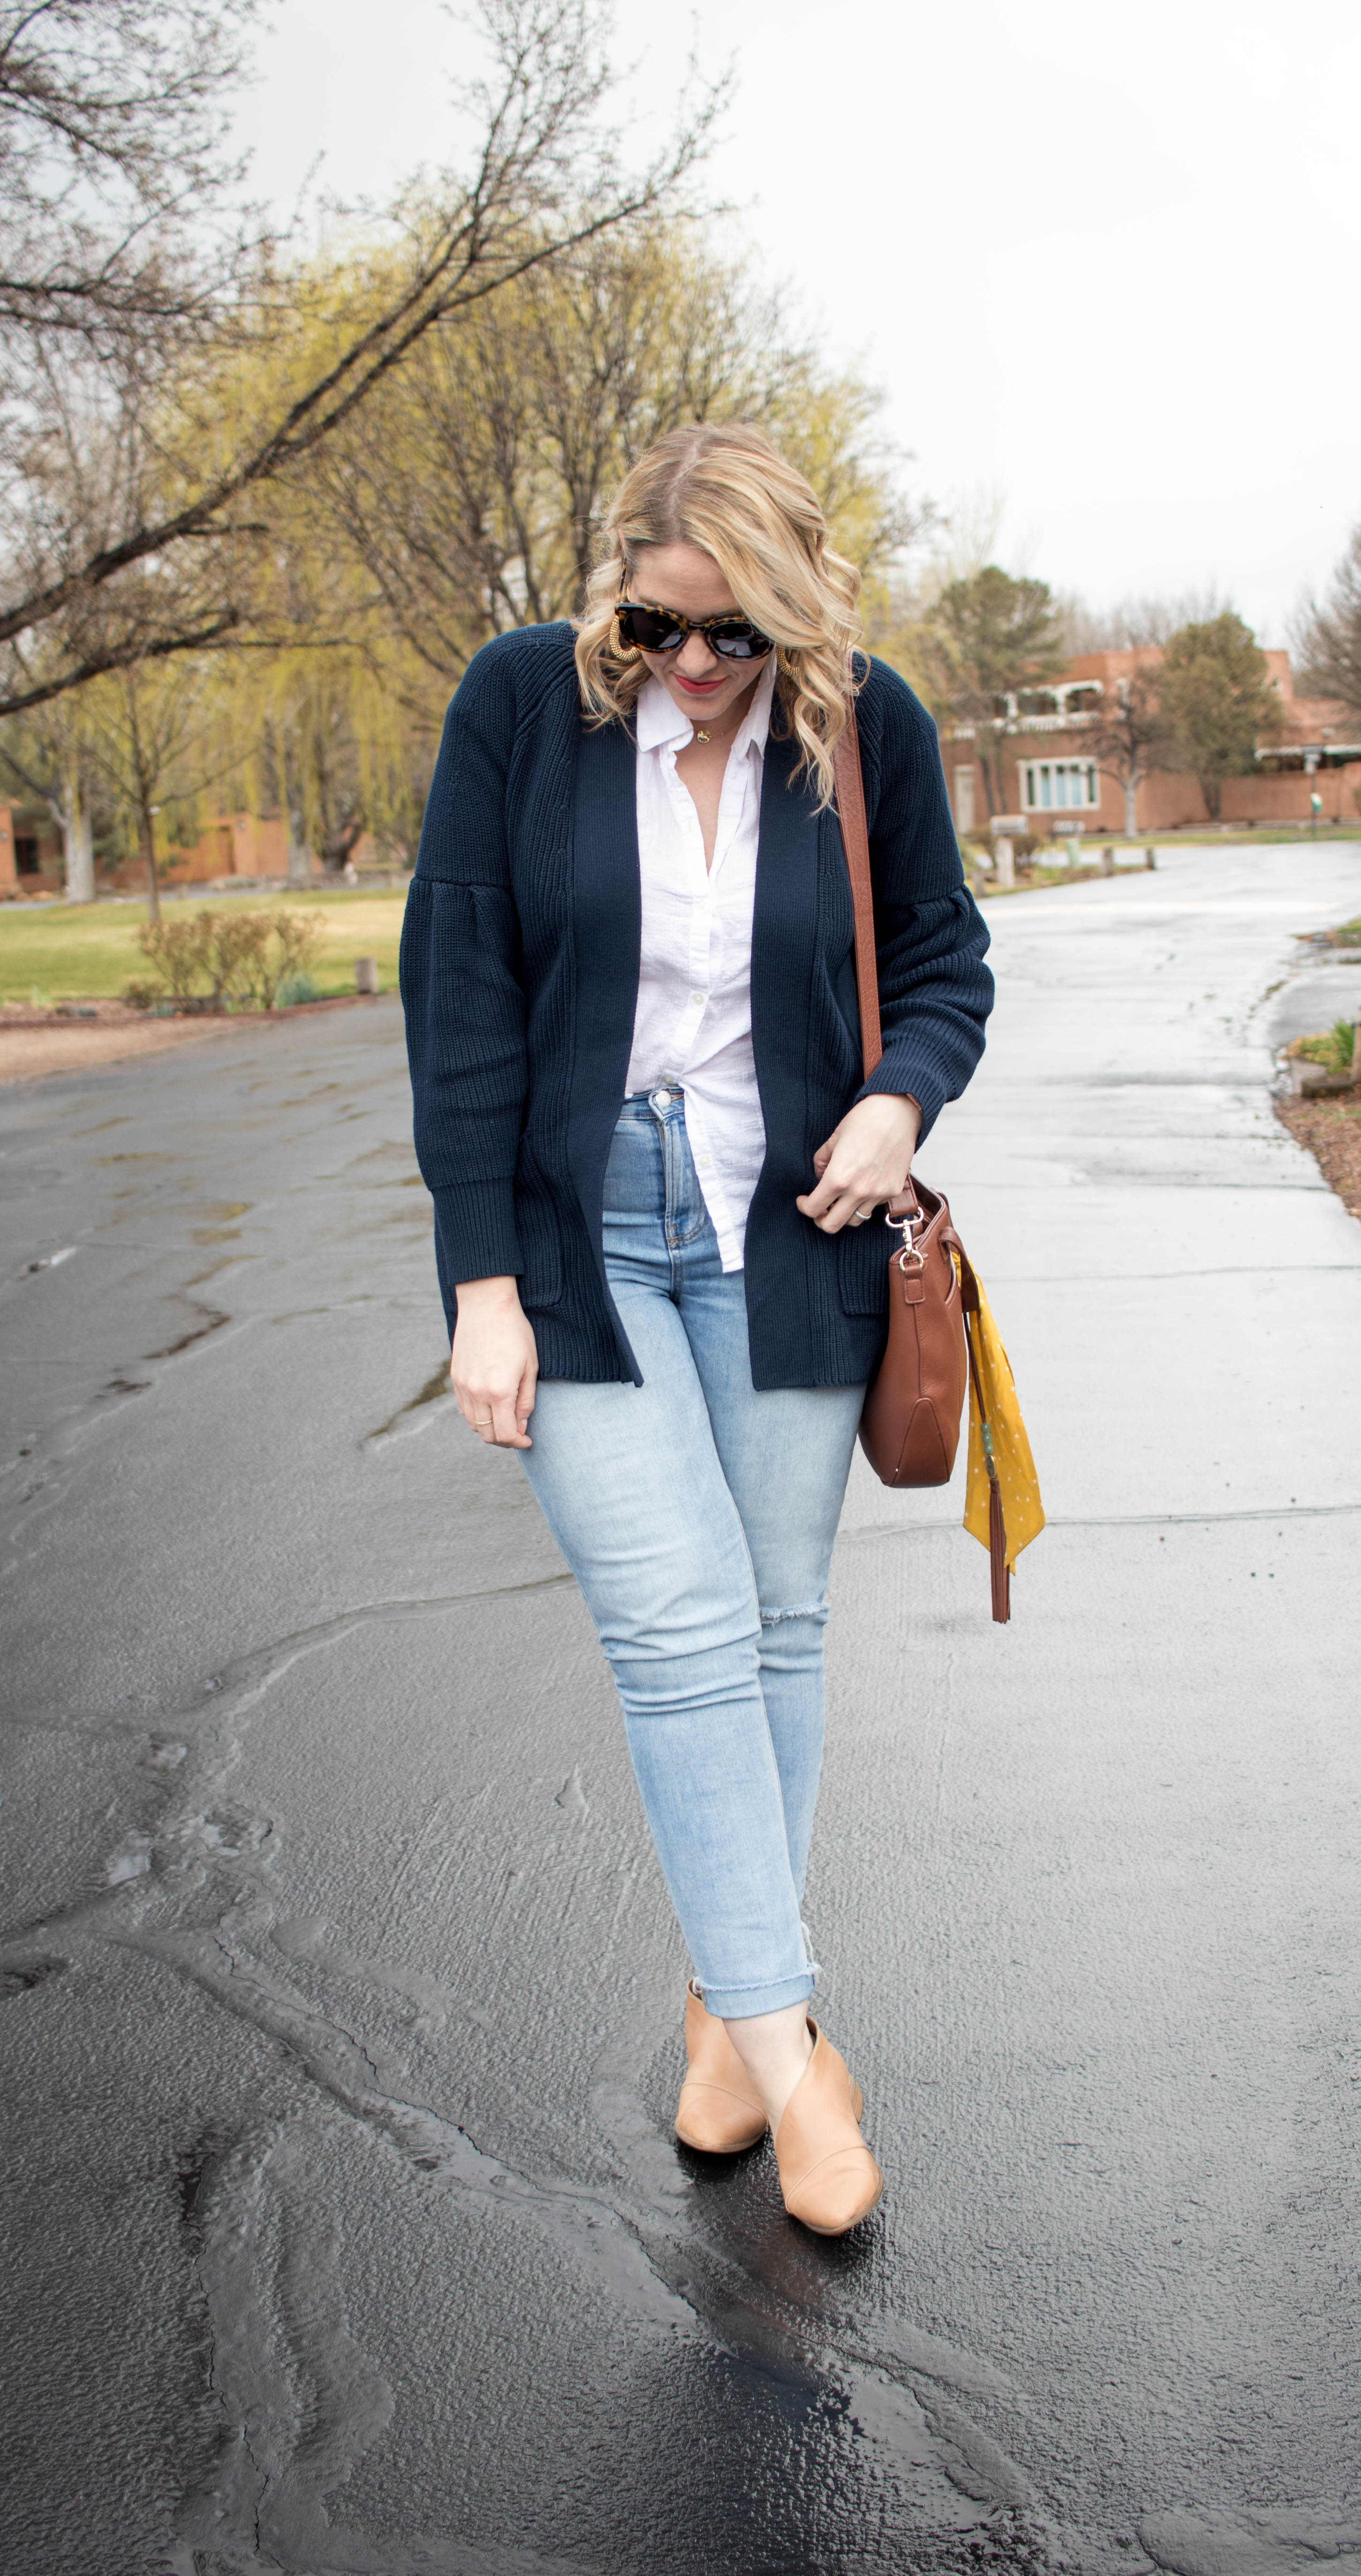 winter to spring transitional outfit #springstyle #springlayers #oldnavystyle